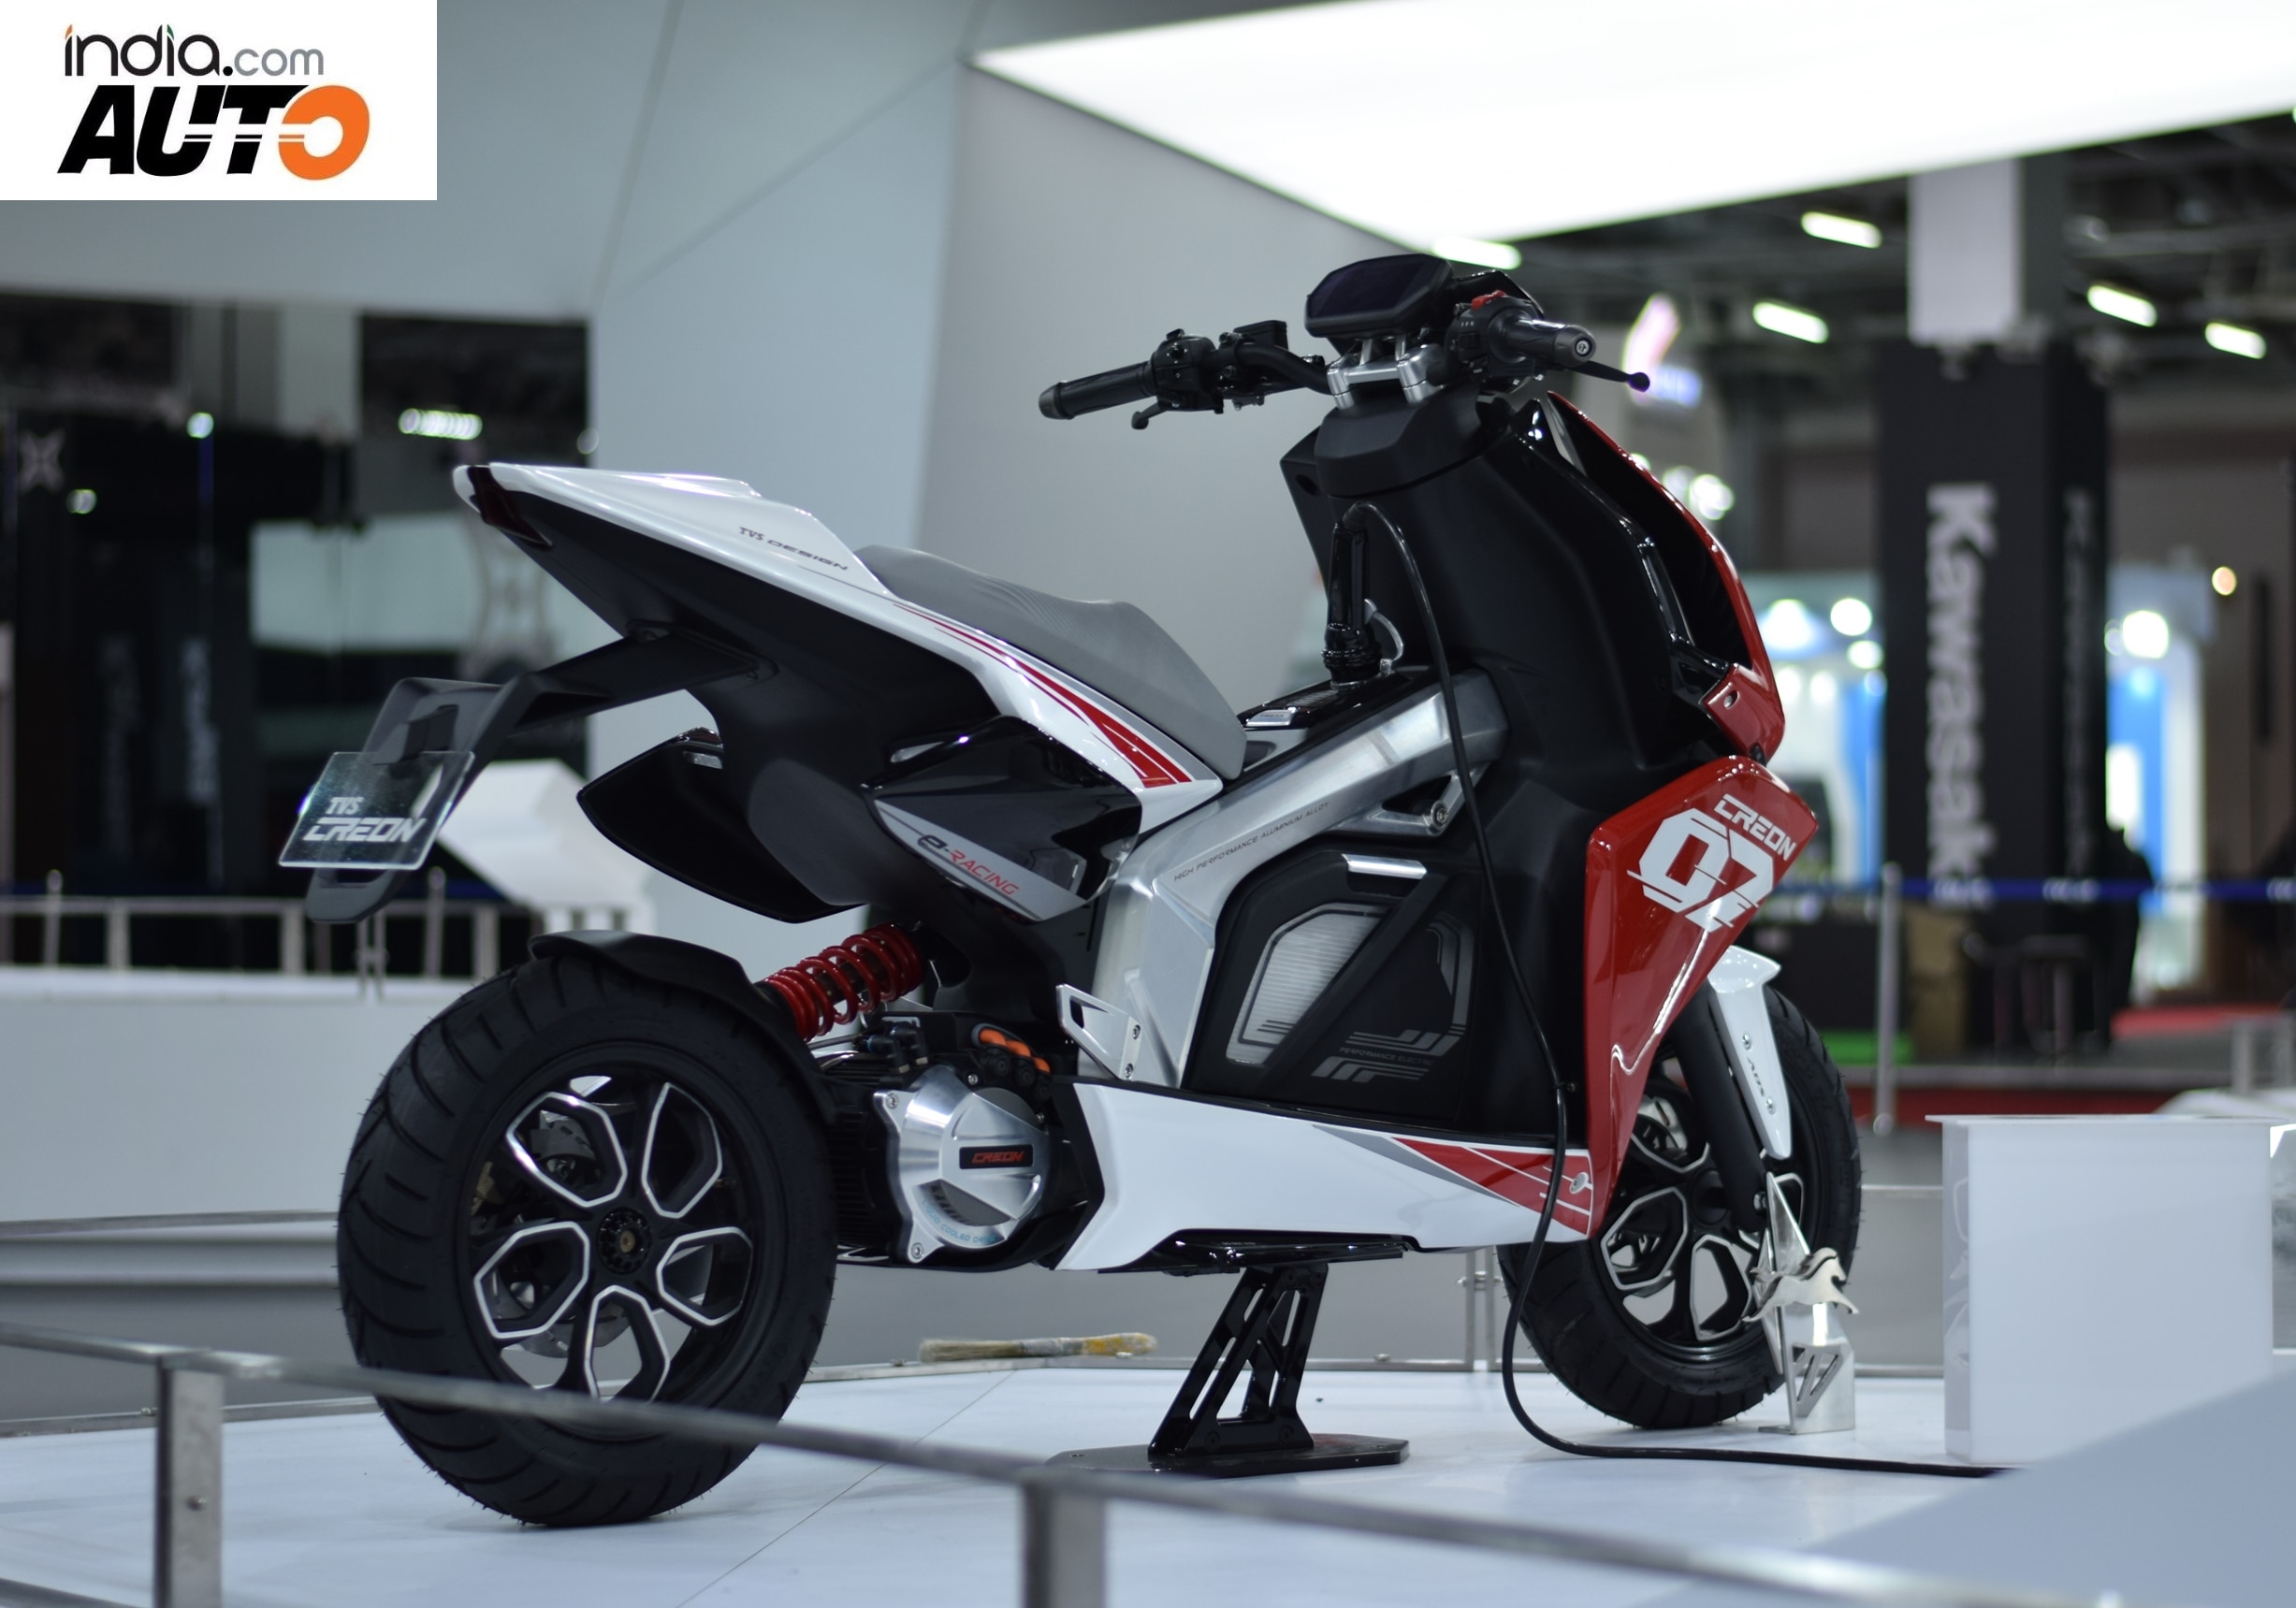 TVS Creon Electric Scooter Concept Showcased at Auto Expo 2018 Price